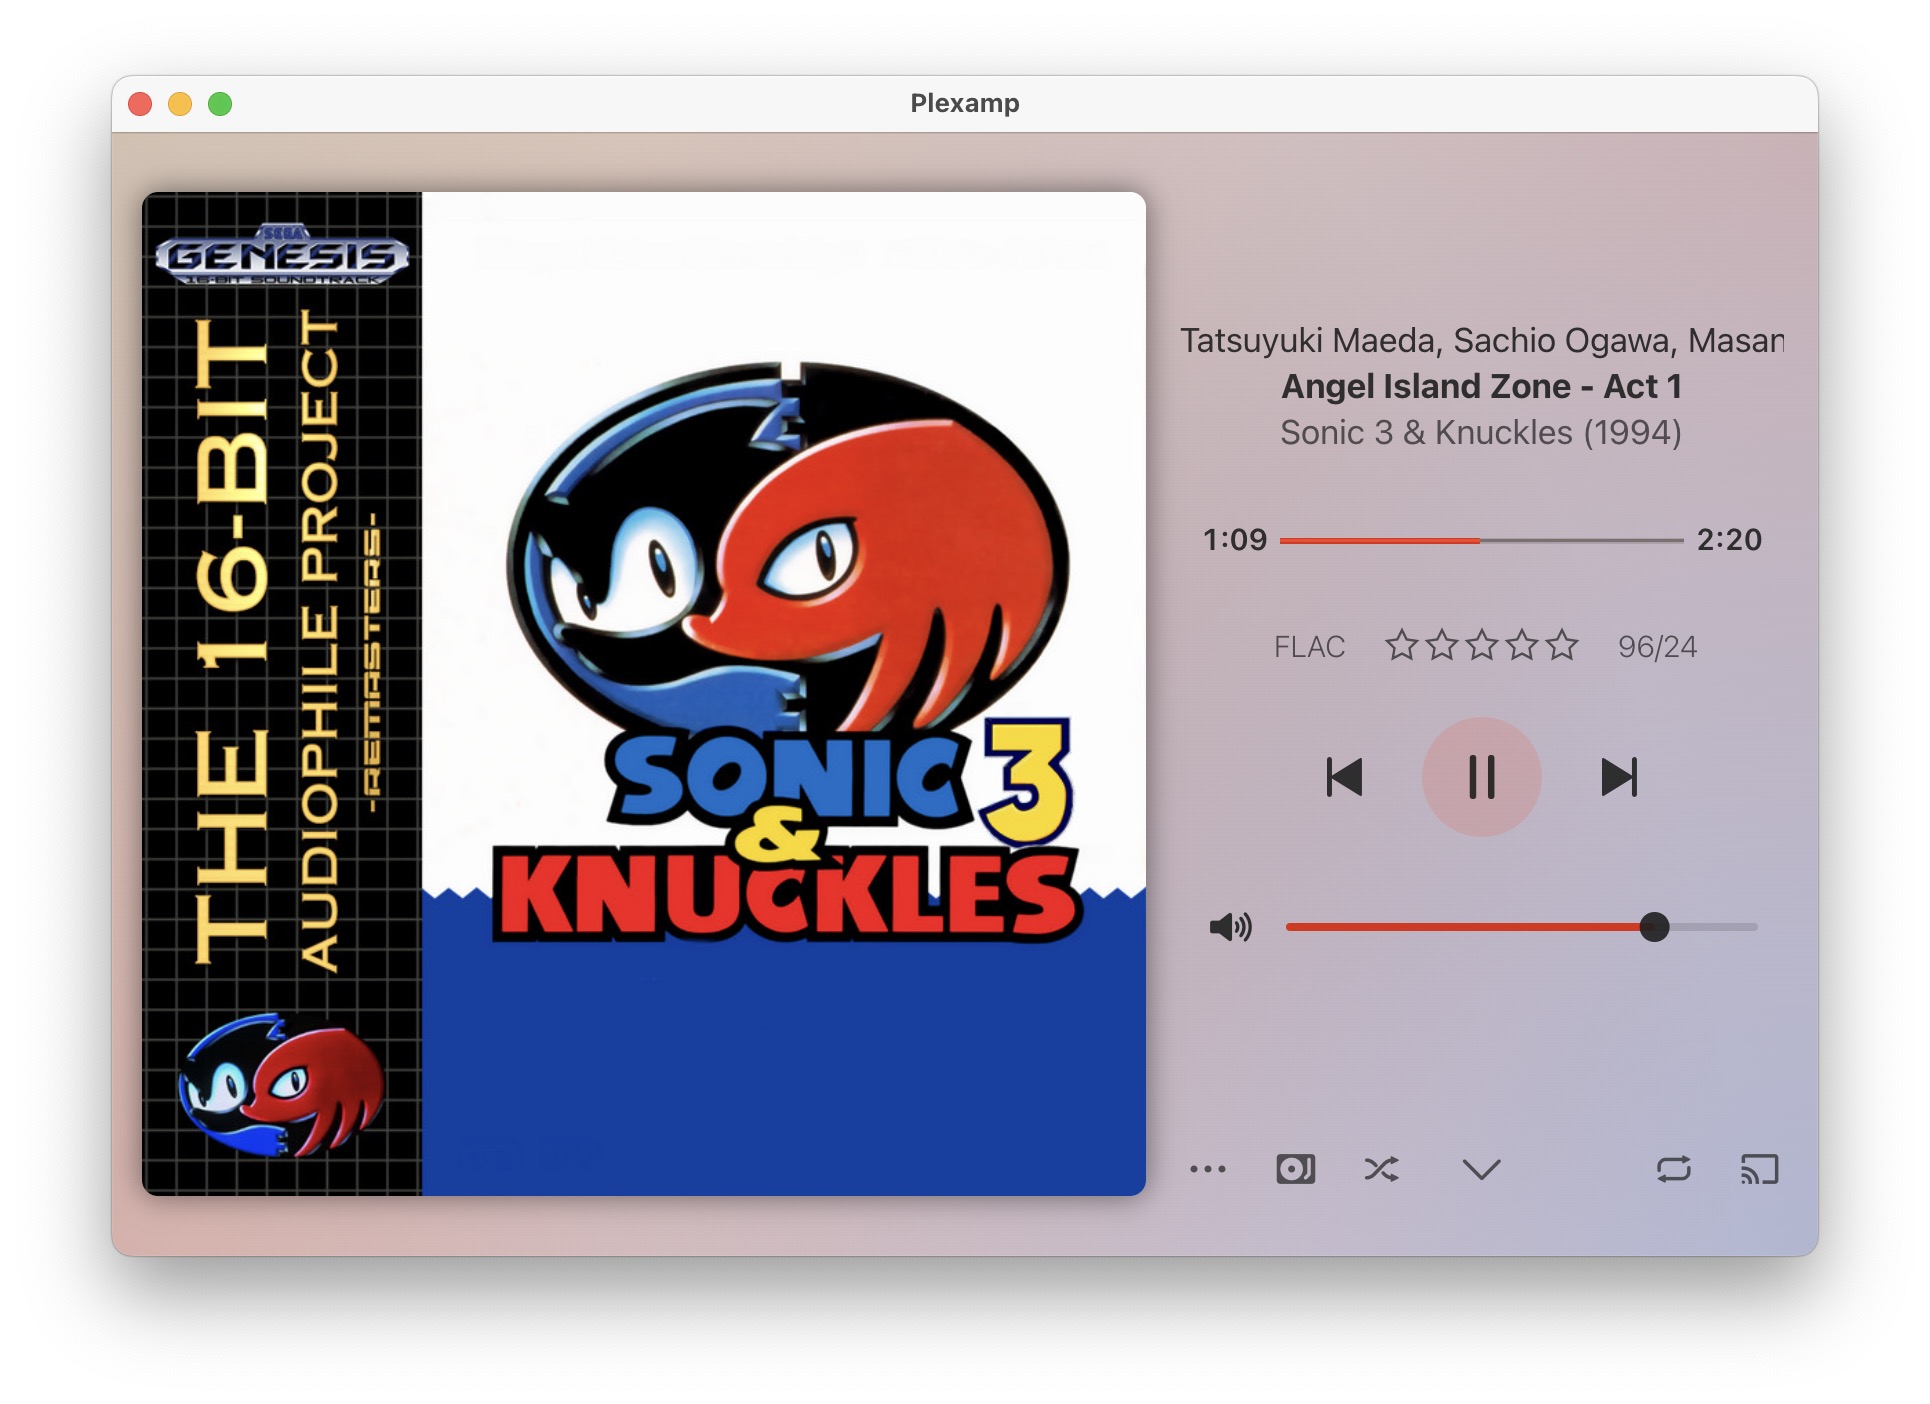 Sonic 3 & Knuckles playing in Plexamp